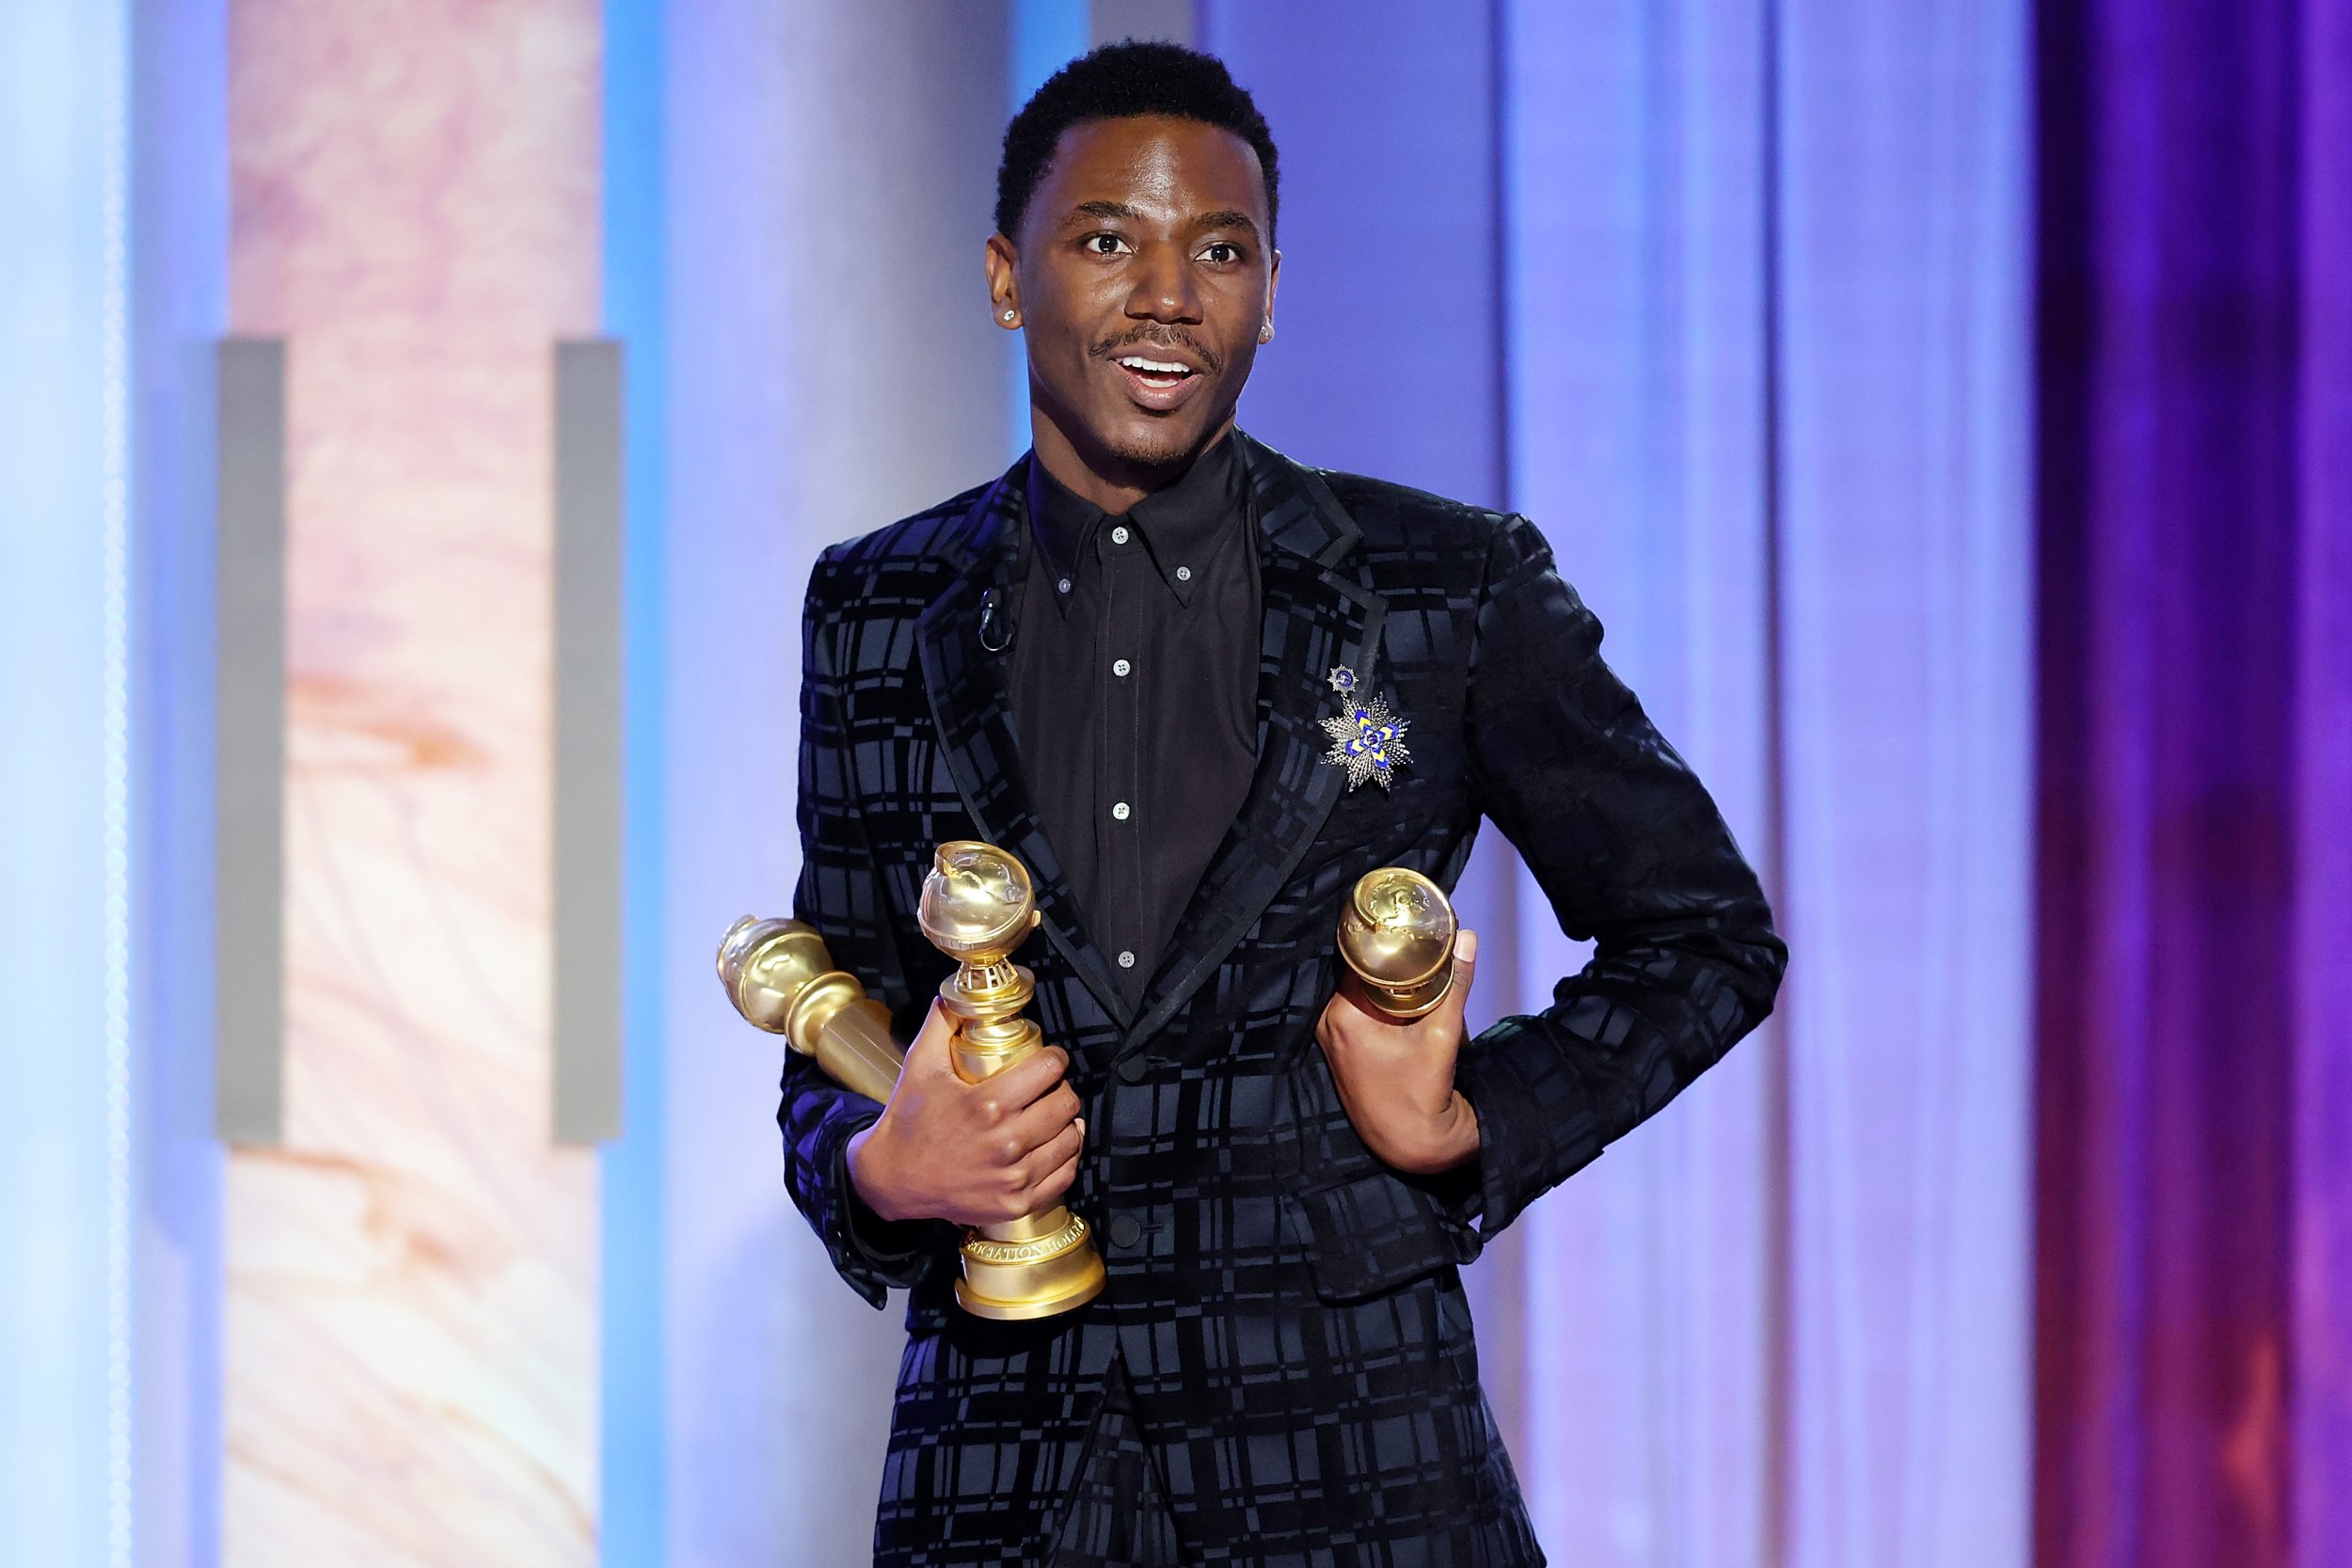 Jerrod Carmichael speaks onstage at the 80th Annual Golden Globe Awards held at the Beverly Hilton Hotel on January 10, 2023, in Beverly Hills, California